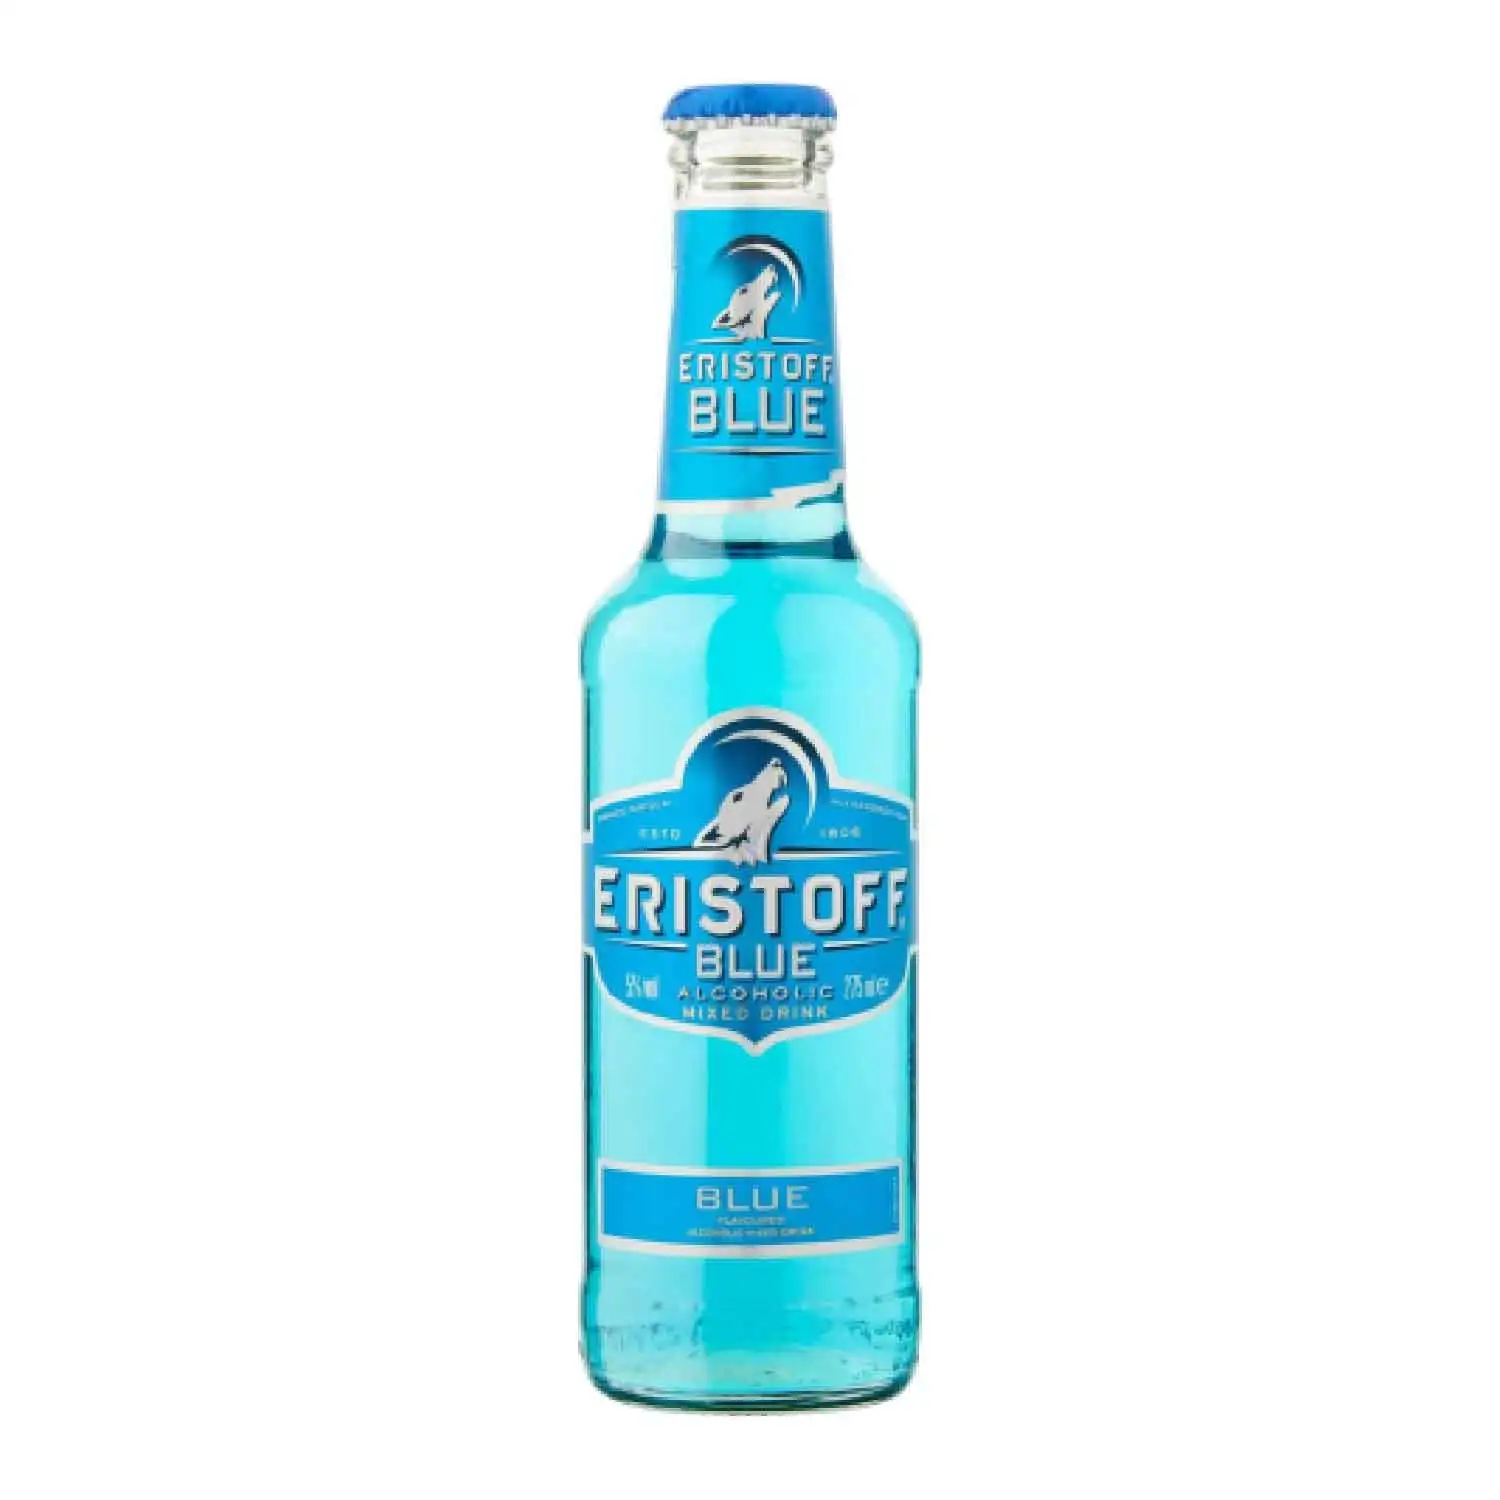 Eristoff blue 27,5cl Alc 4% - Buy at Real Tobacco